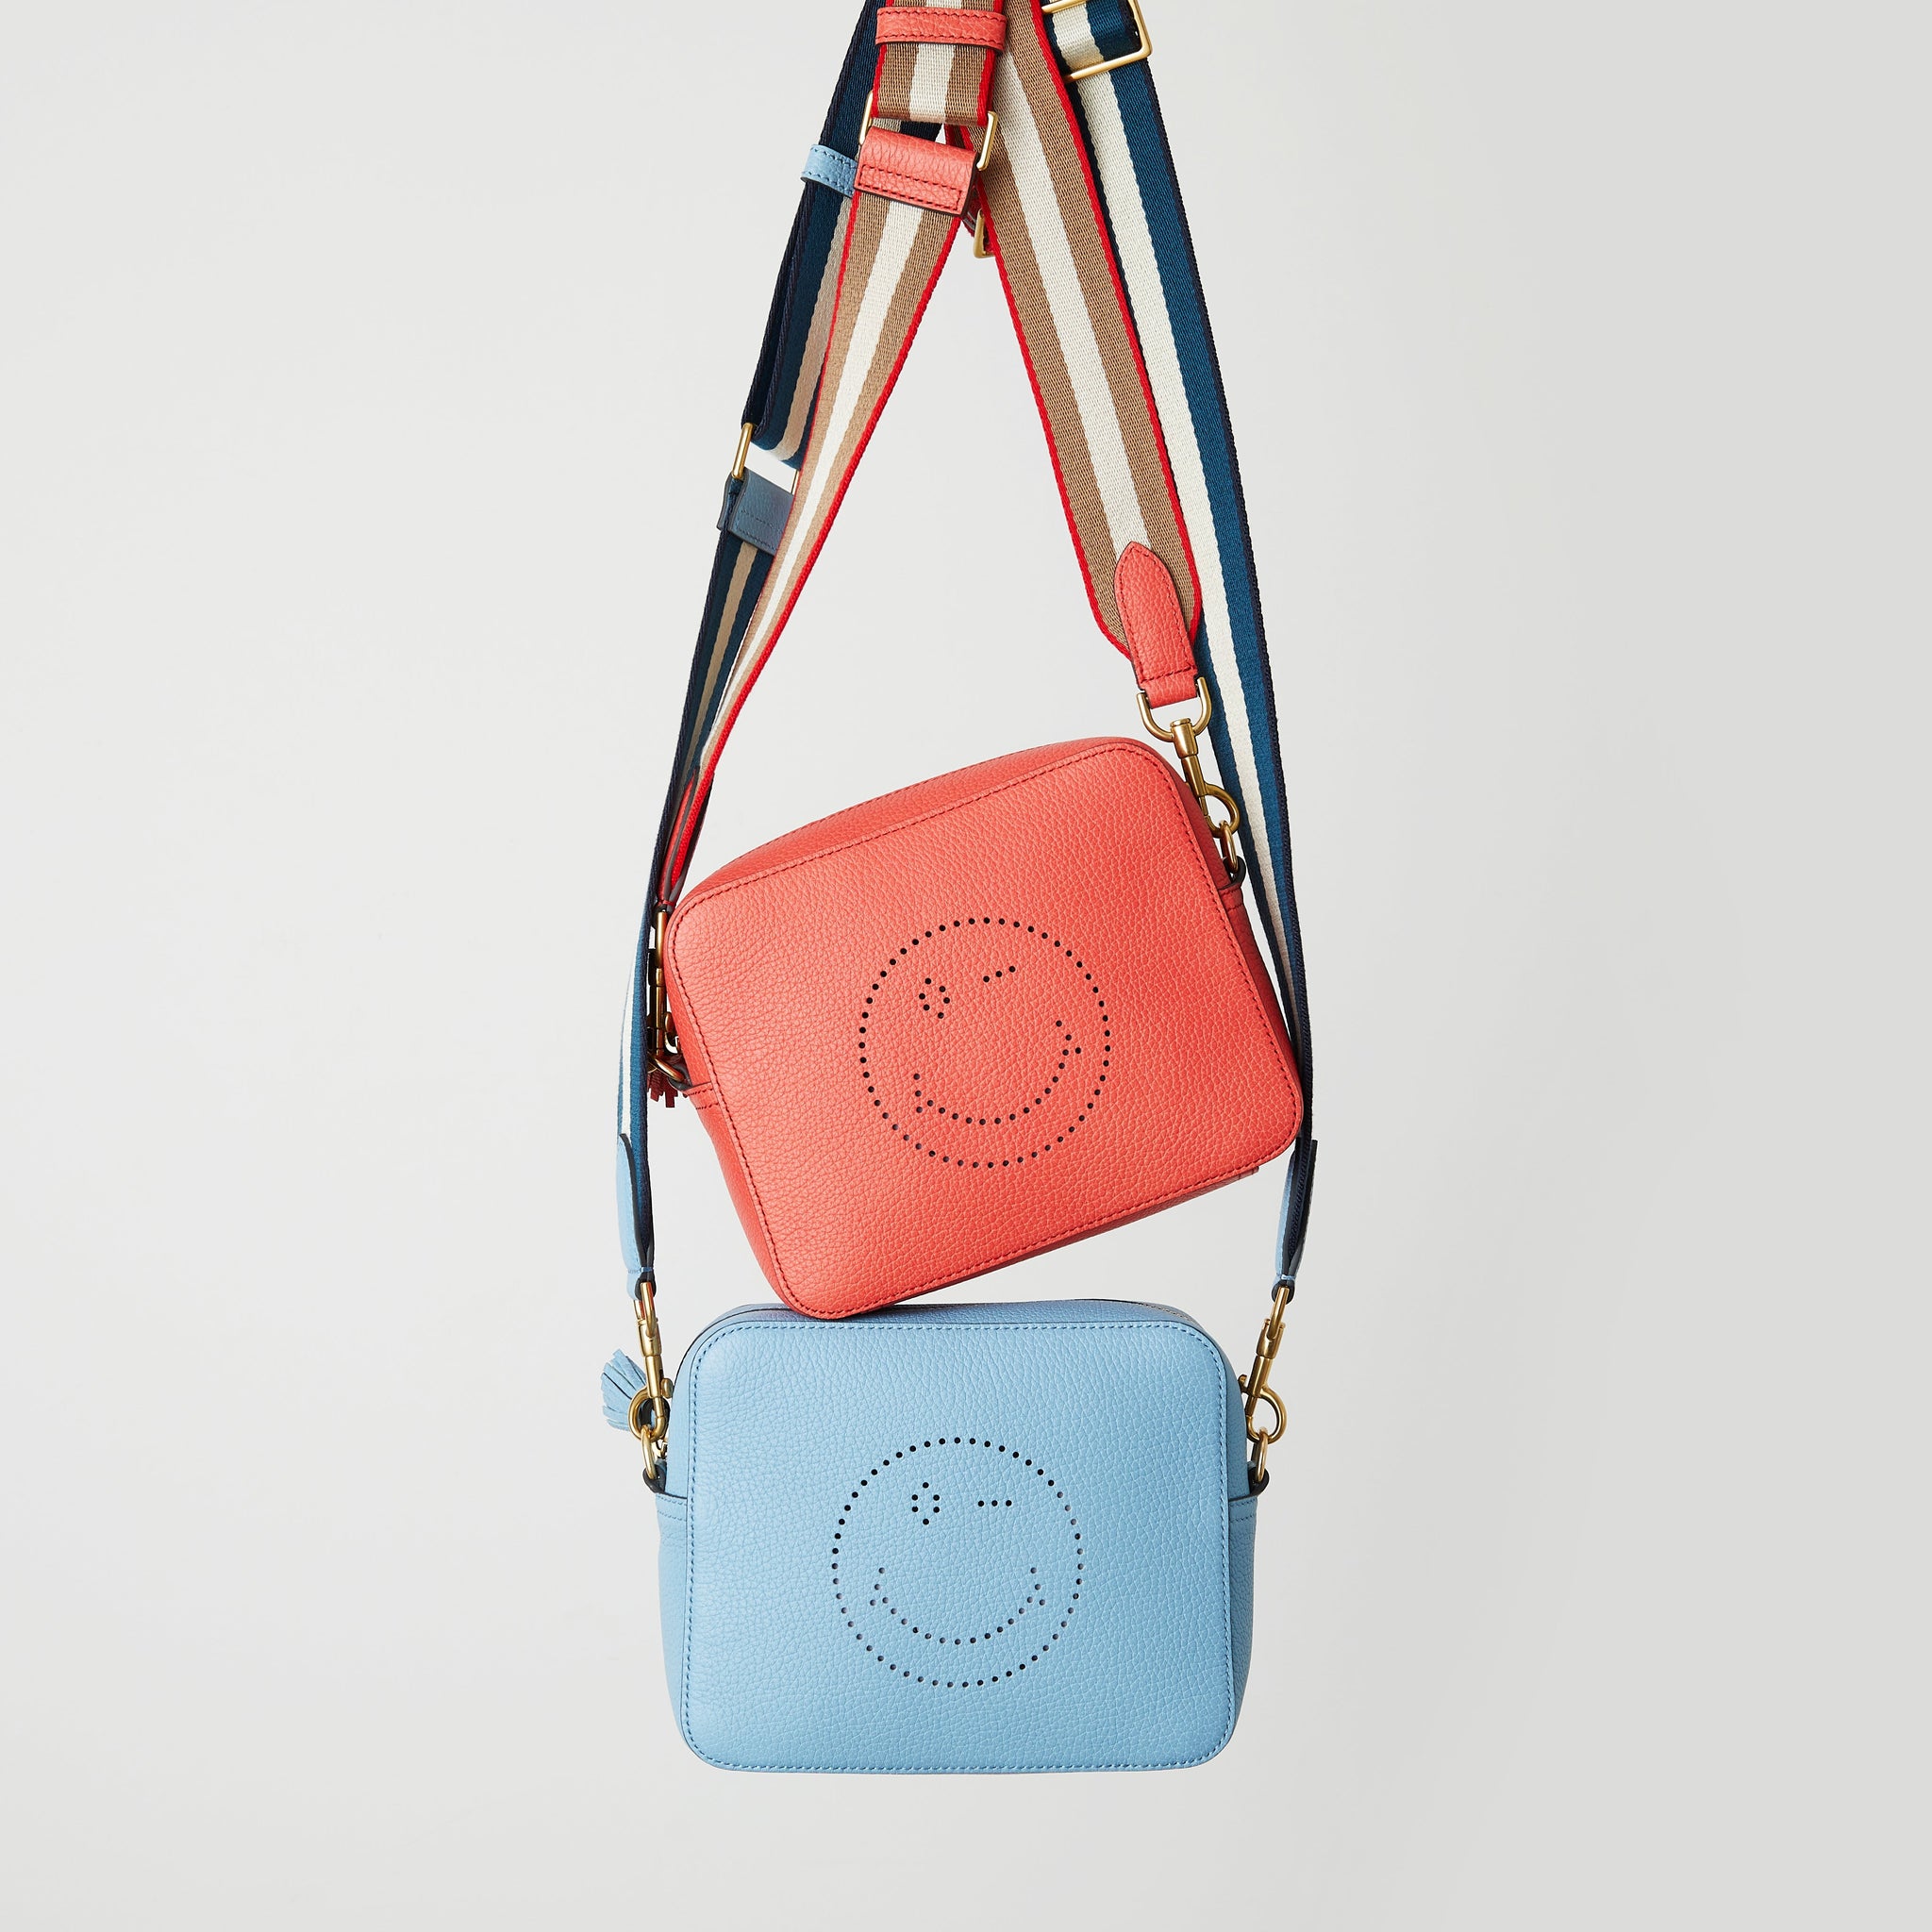 Wink Cross-body -

                  
                    Tumbled Leather in Forget Me Not -
                  

                  Anya Hindmarch EU
